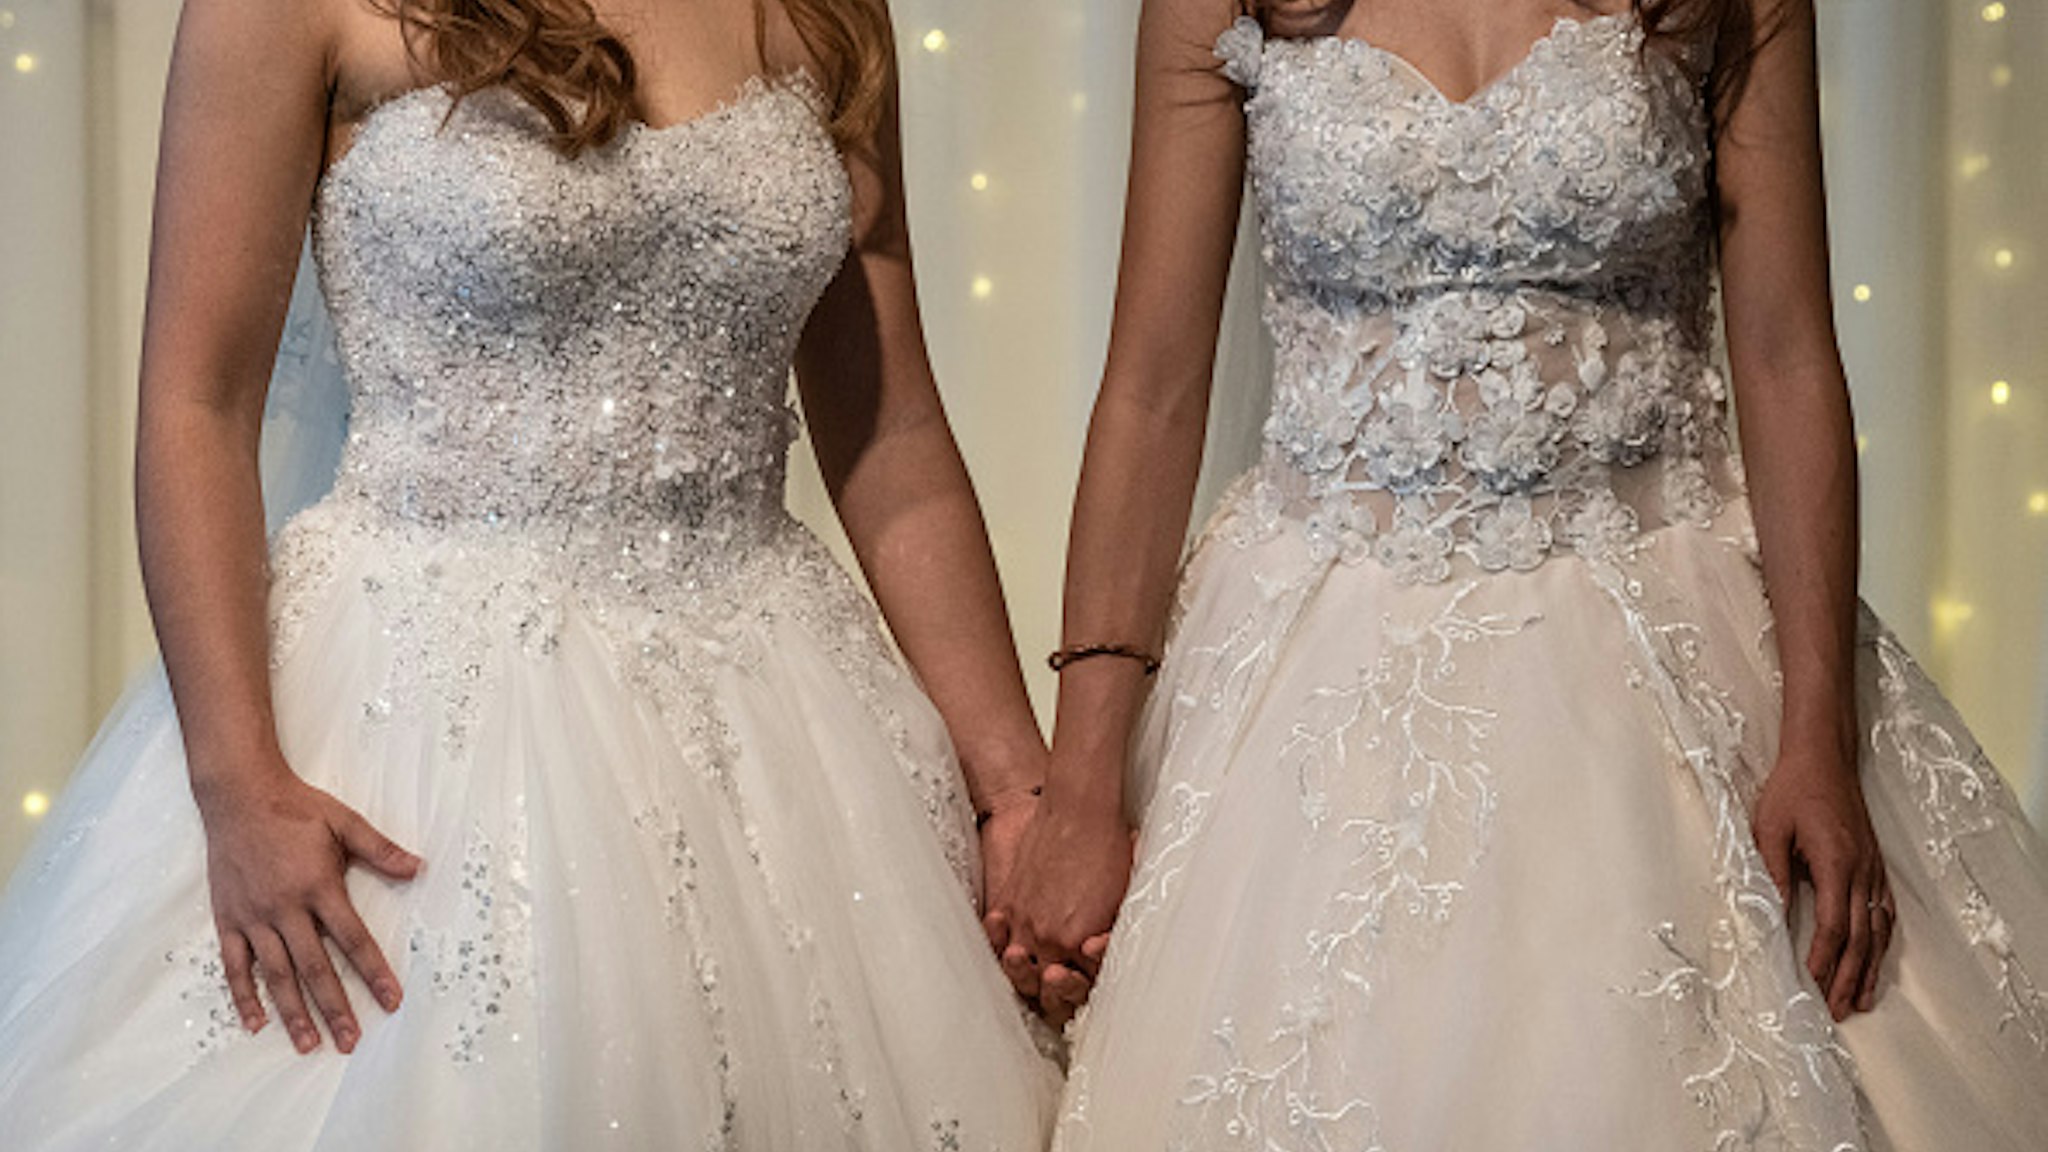 TAIPEI, TAIWAN - MAY 18: Lesbian couple Amber and Huan Huan hold hands during a wedding event to raise HIV awareness a day after Taiwan's parliament voted to legalise same-sex marriage, on May 18, 2019 in Taipei, Taiwan. Taiwan yesterday became the first country in Asia to legalise same-sex marriage after lawmakers voted to allow same-sex couples full legal marriage rights, including areas in taxes, insurance and child custody. Thousands of gay rights supporters gathered outside the parliament building in the nation's capital as the result was announced. The bill will go into effect on May 24.